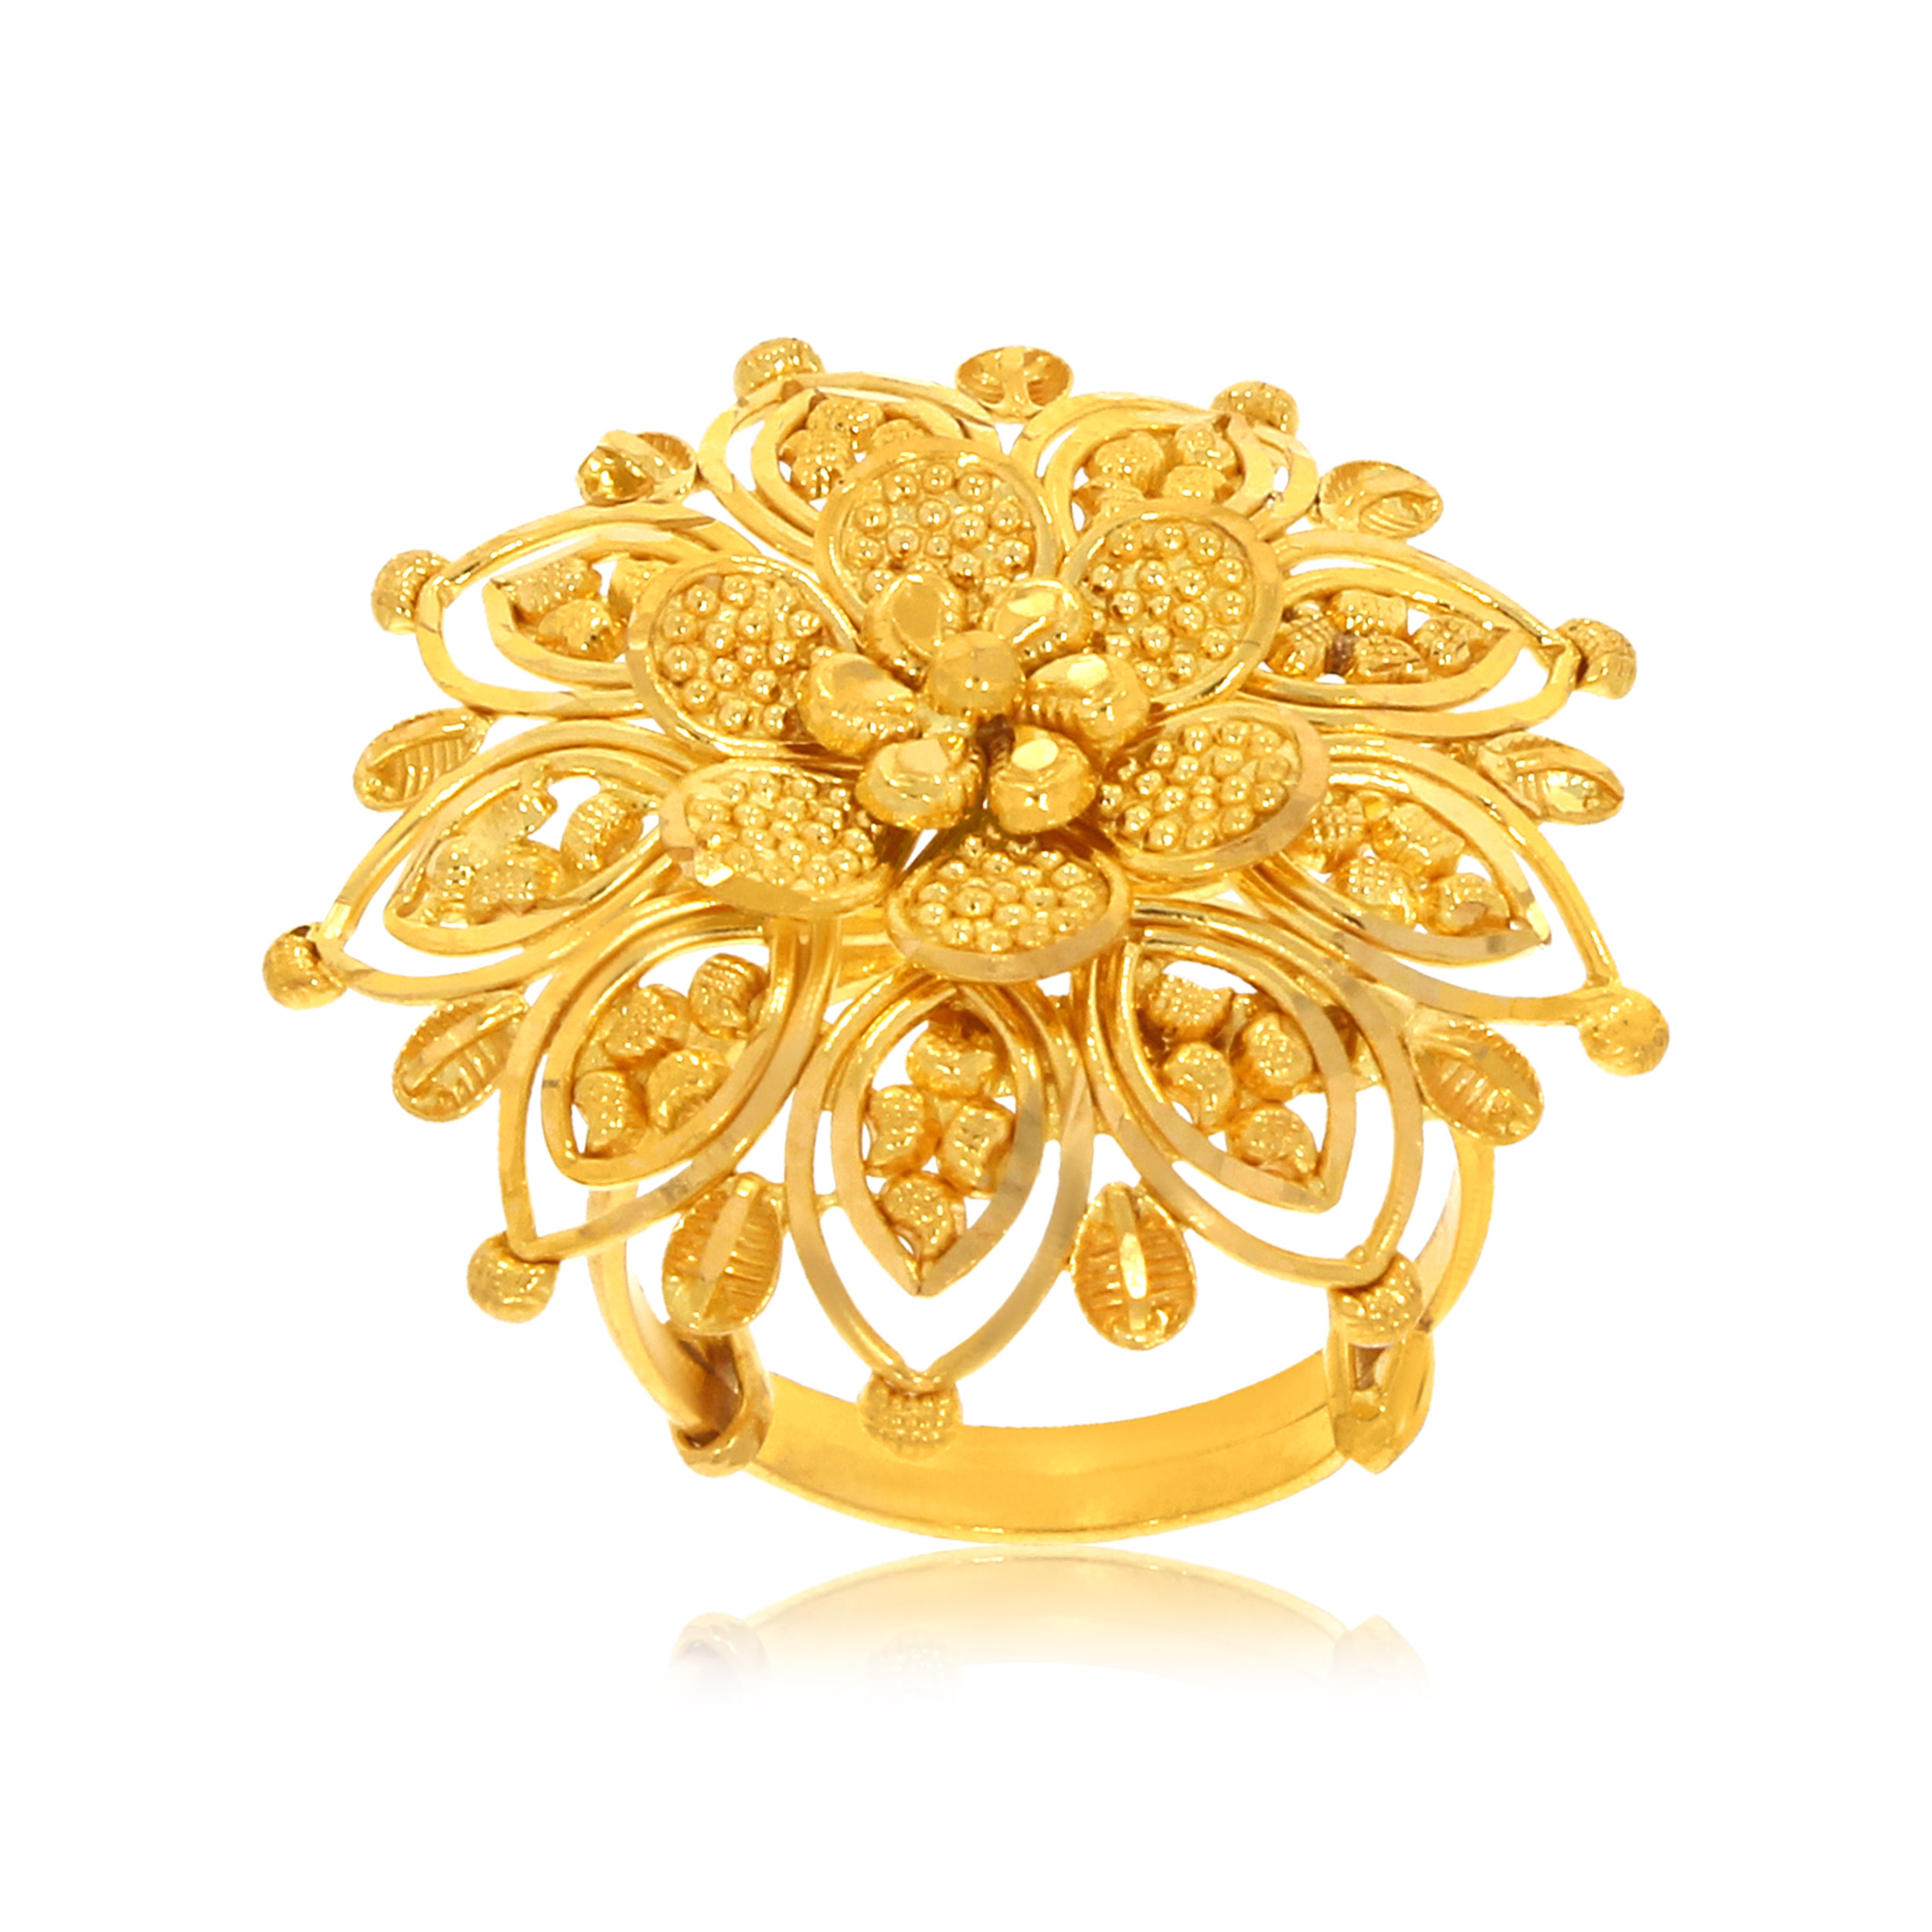 sia AABI JEWELS 22CT  BIS HALLMARK GOLD RING FOR  WOMEN